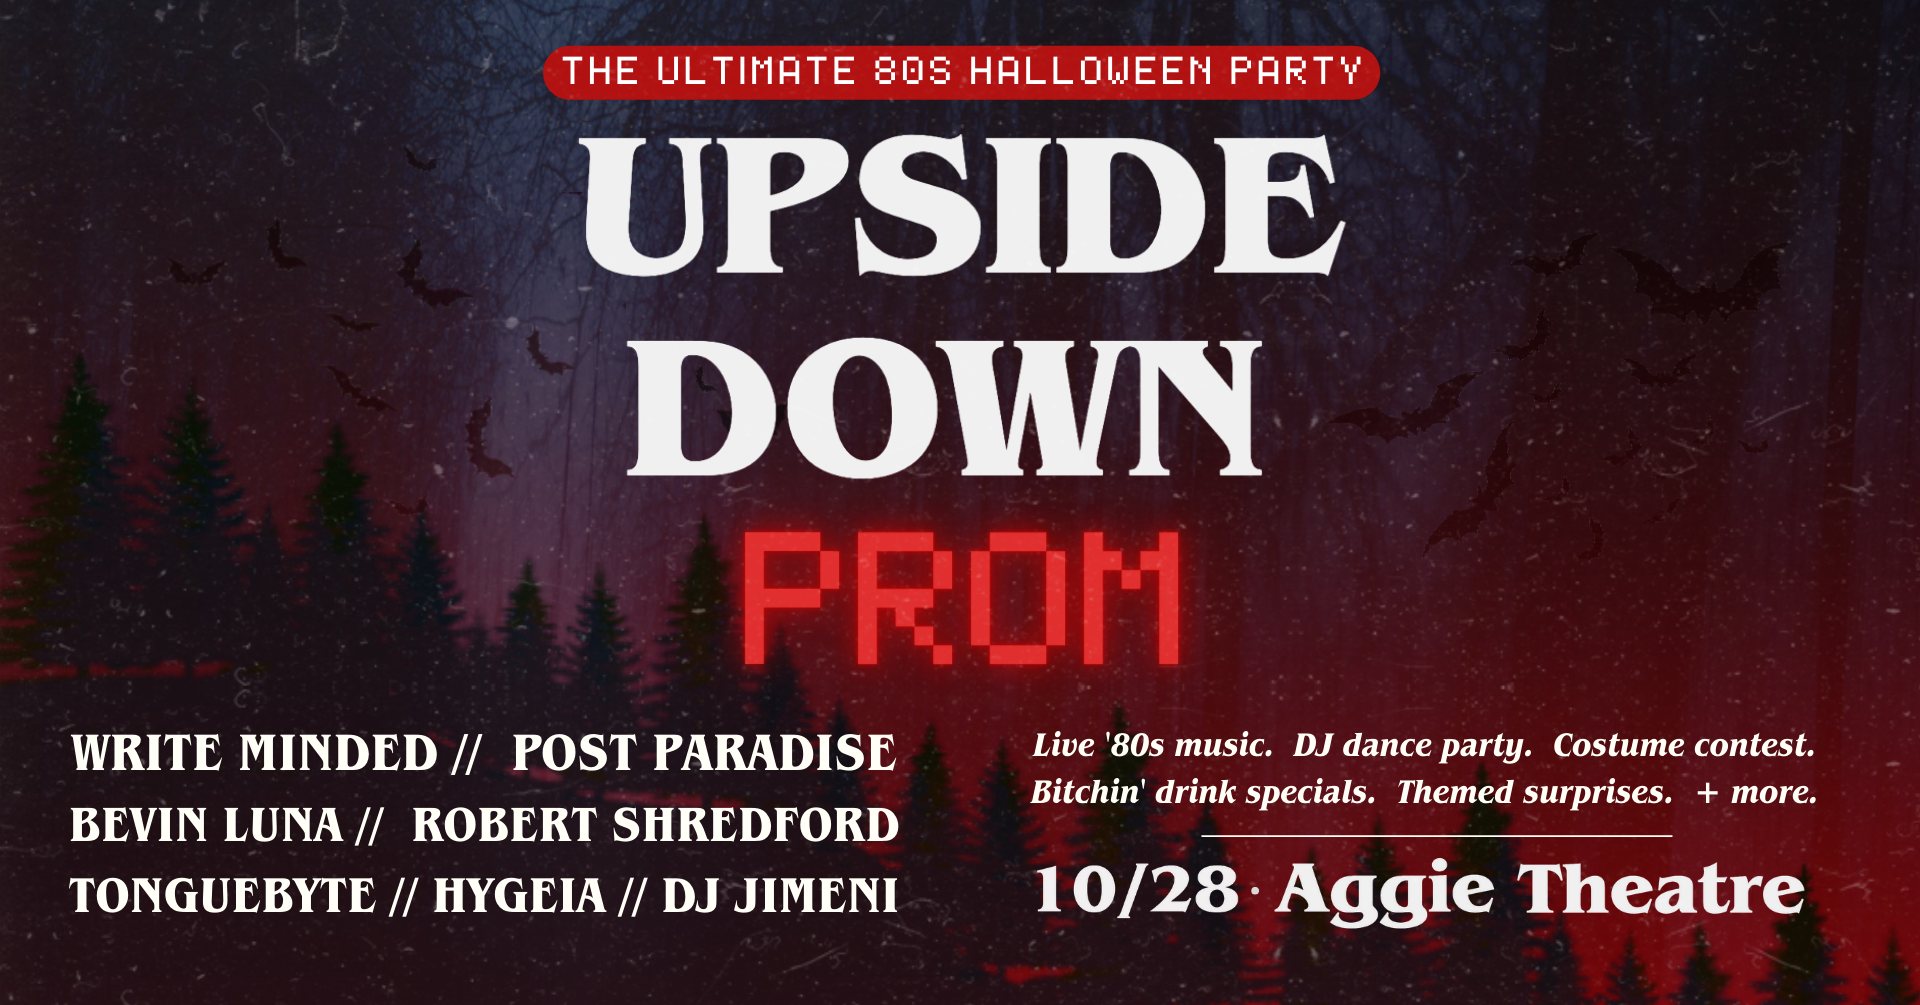 The Upside Down Prom